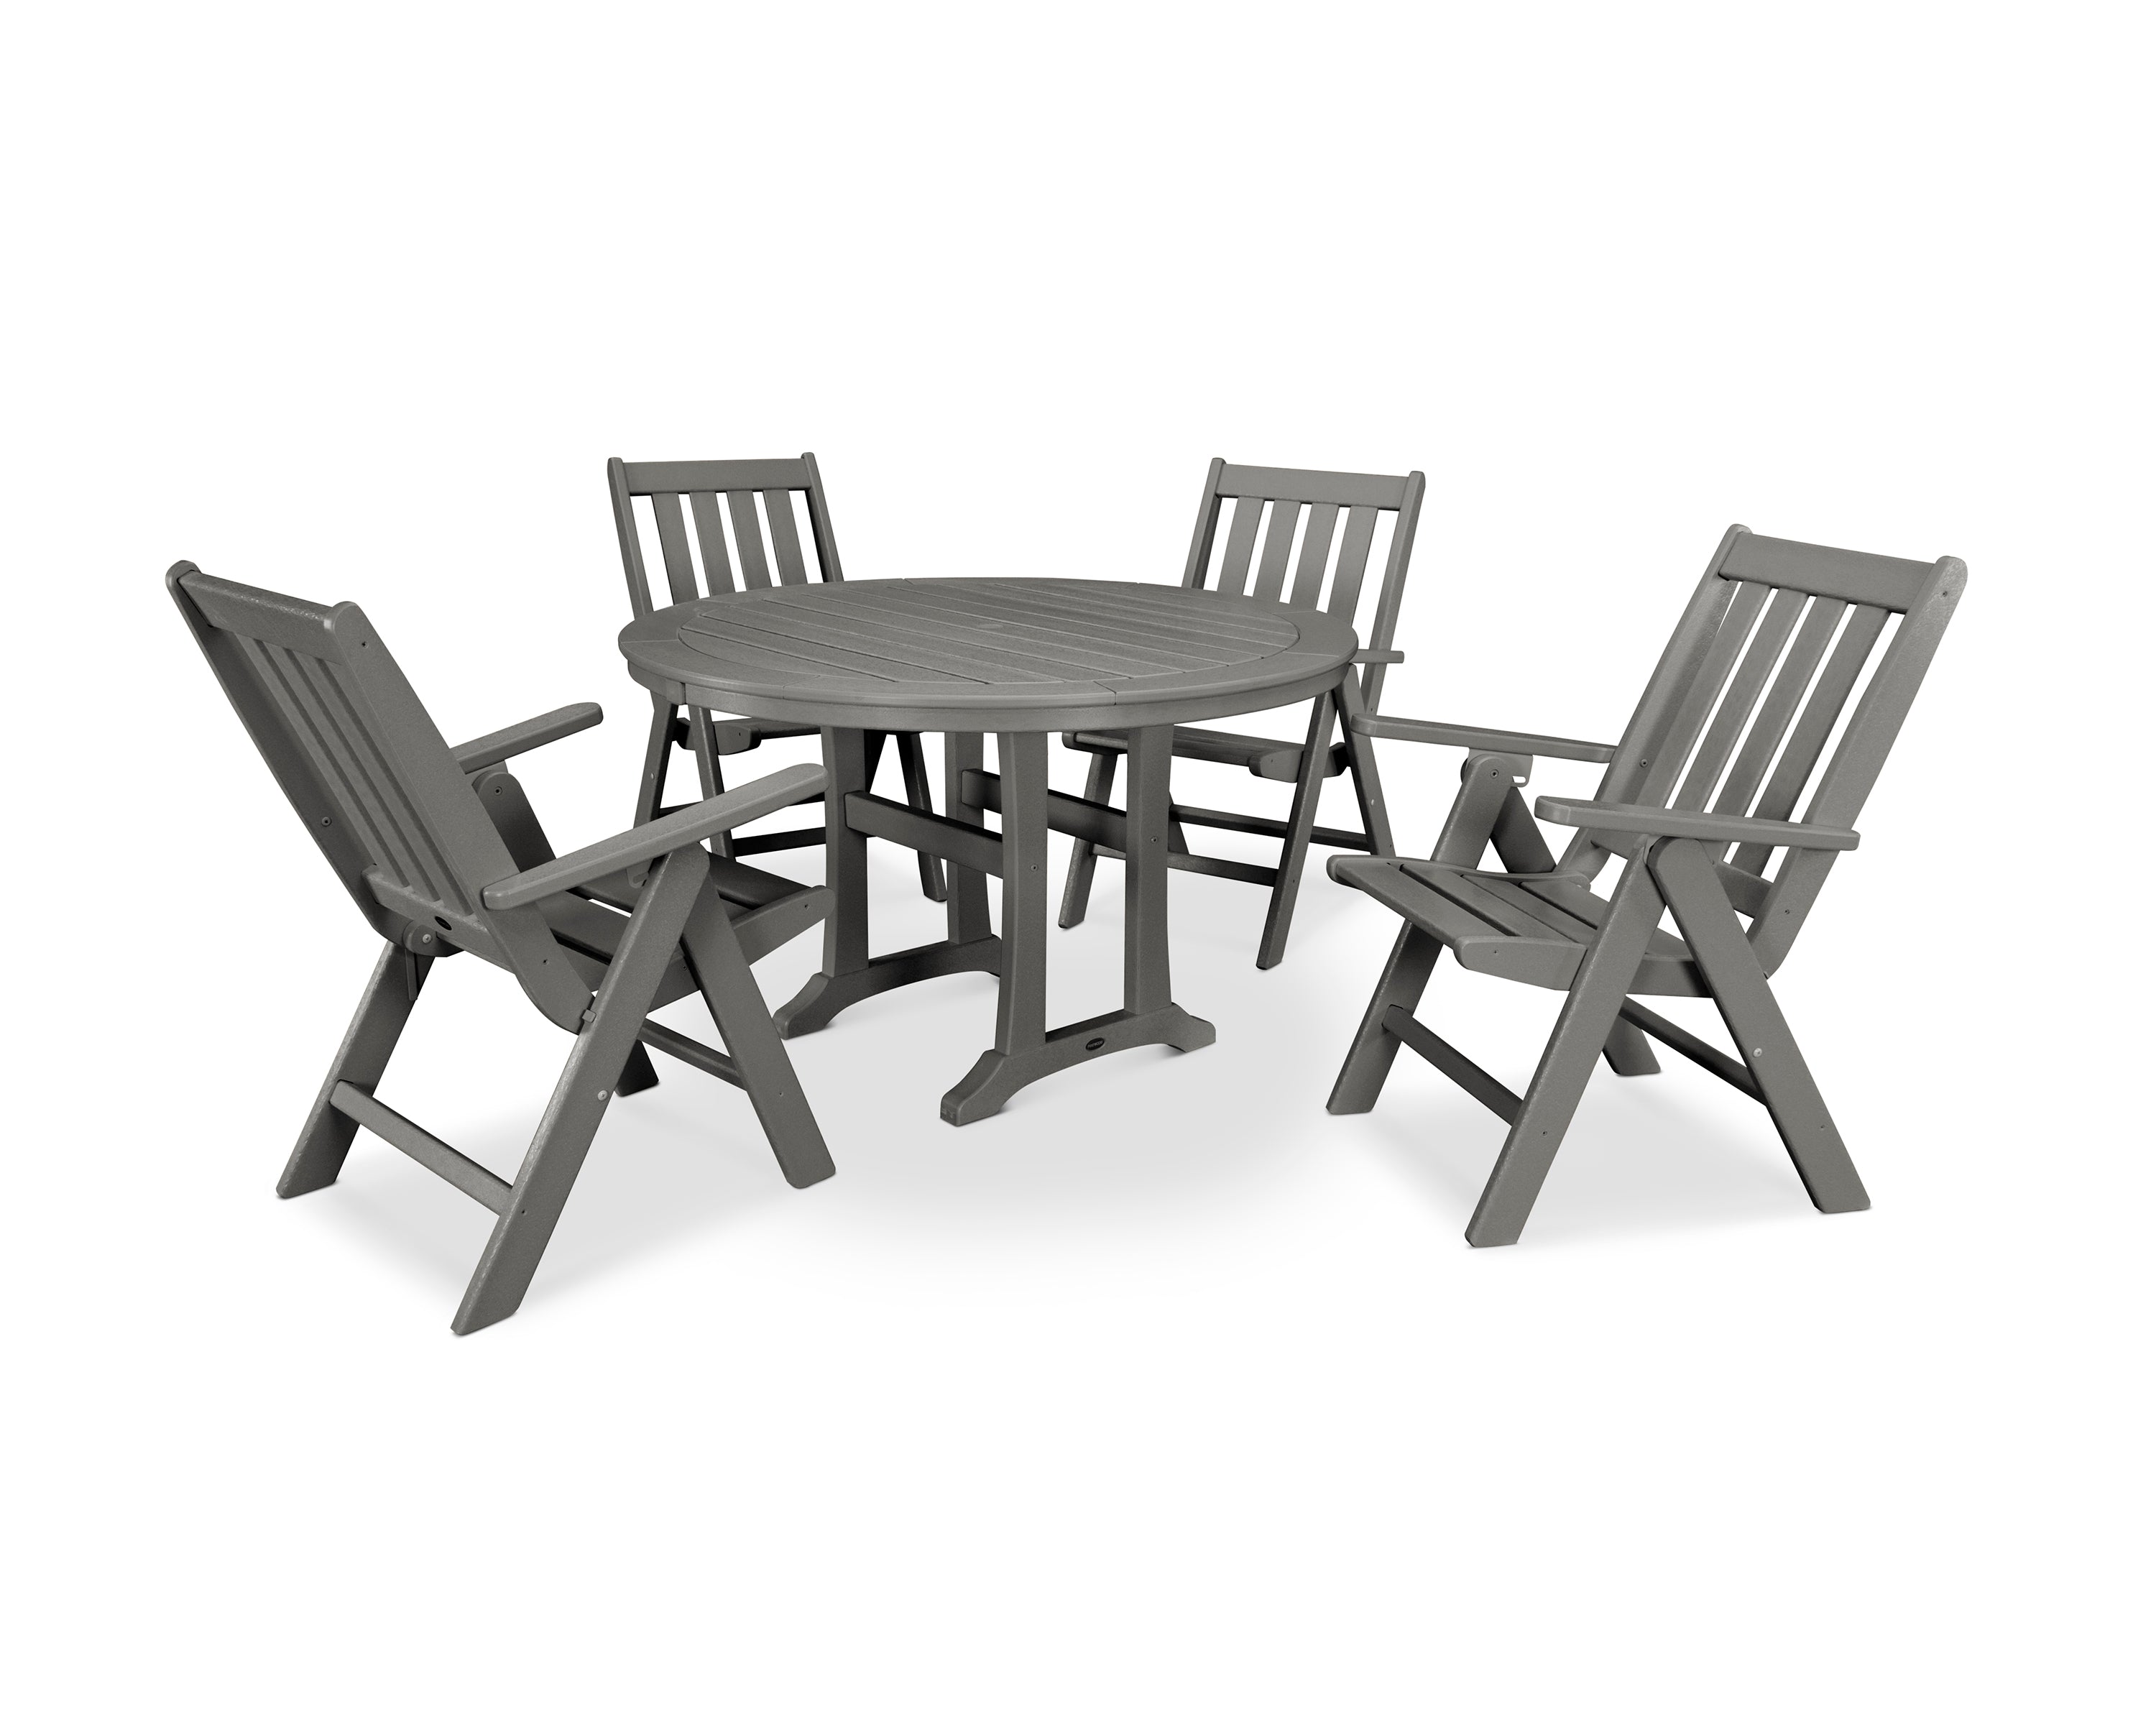 POLYWOOD® Vineyard Folding Chair 5-Piece Round Dining Set with Trestle Legs in Slate Grey